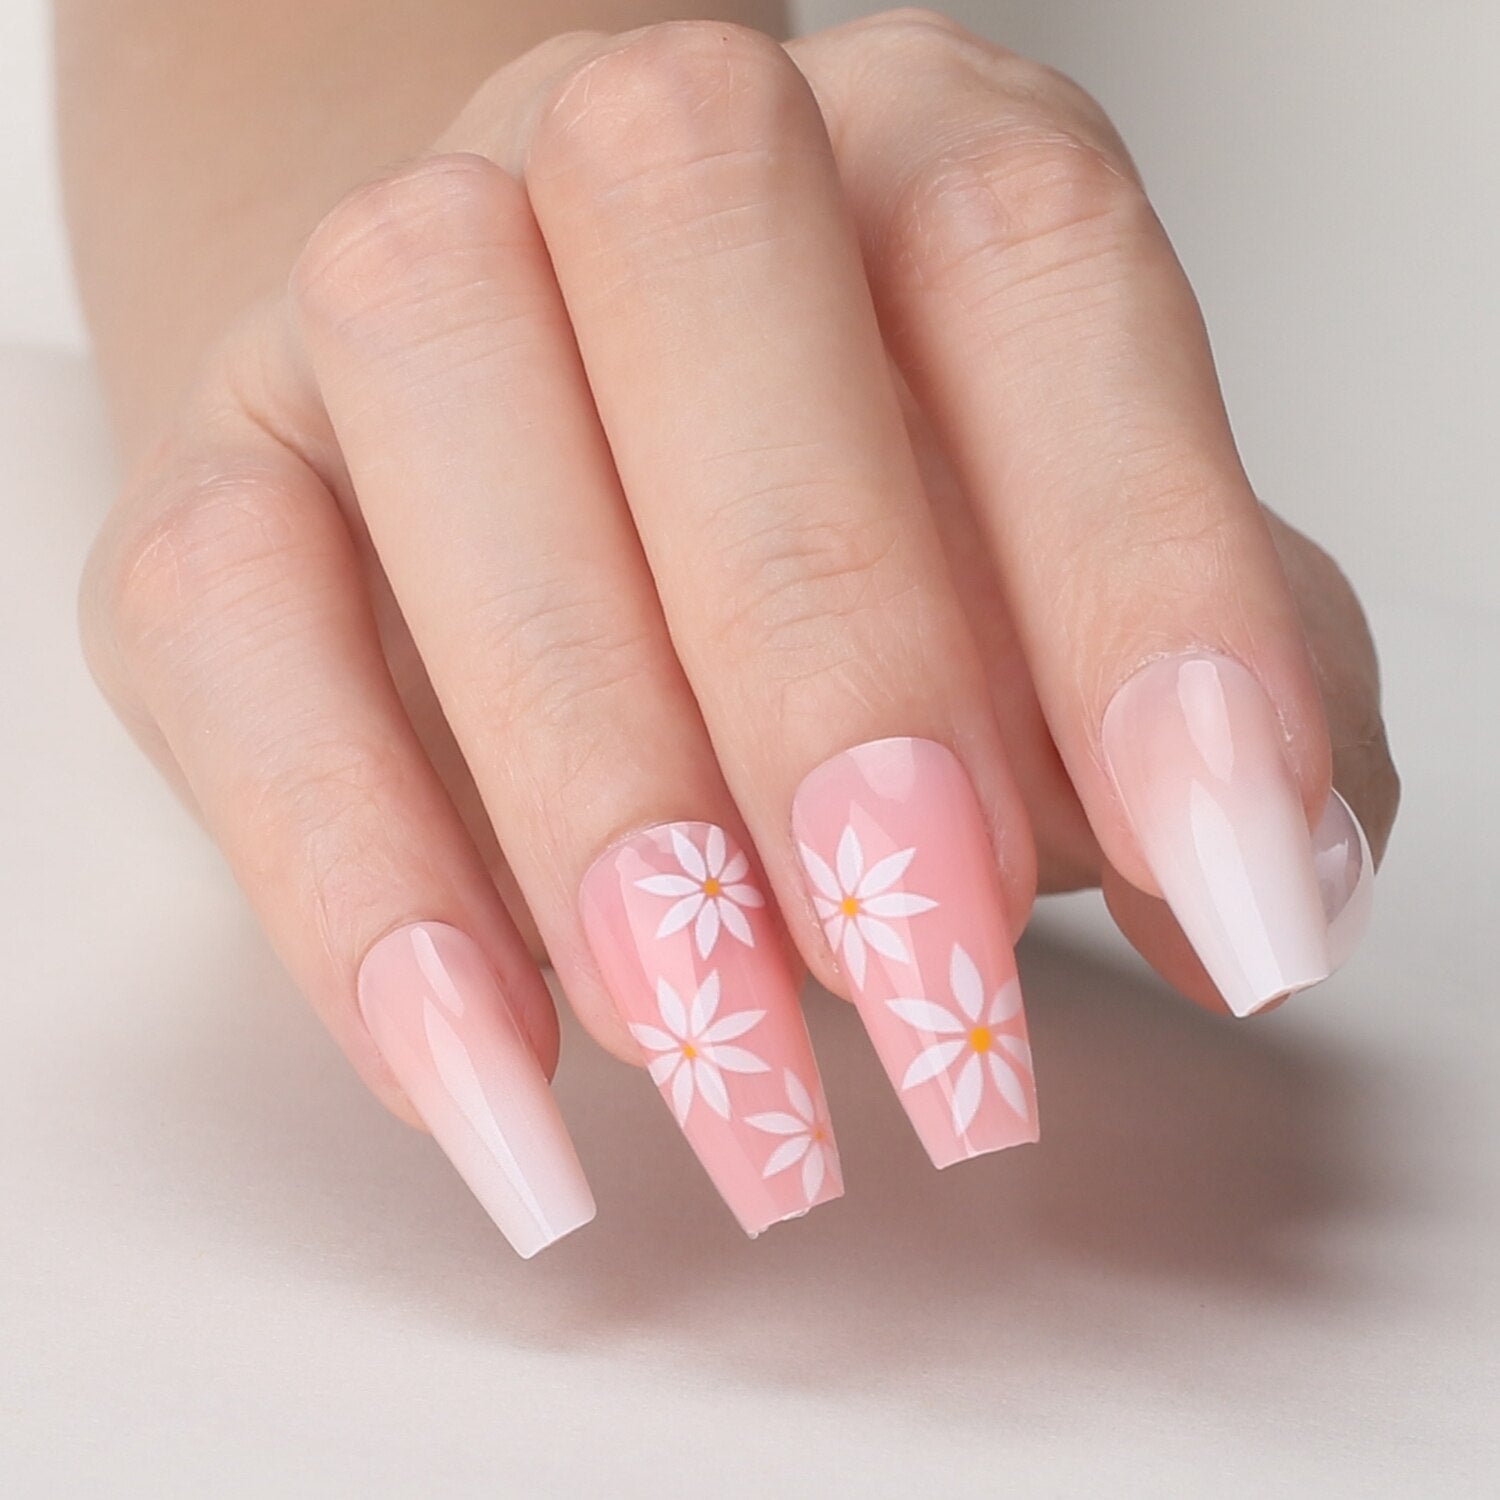 Faux Ongles Babyboomer à fleurs Press On Nails